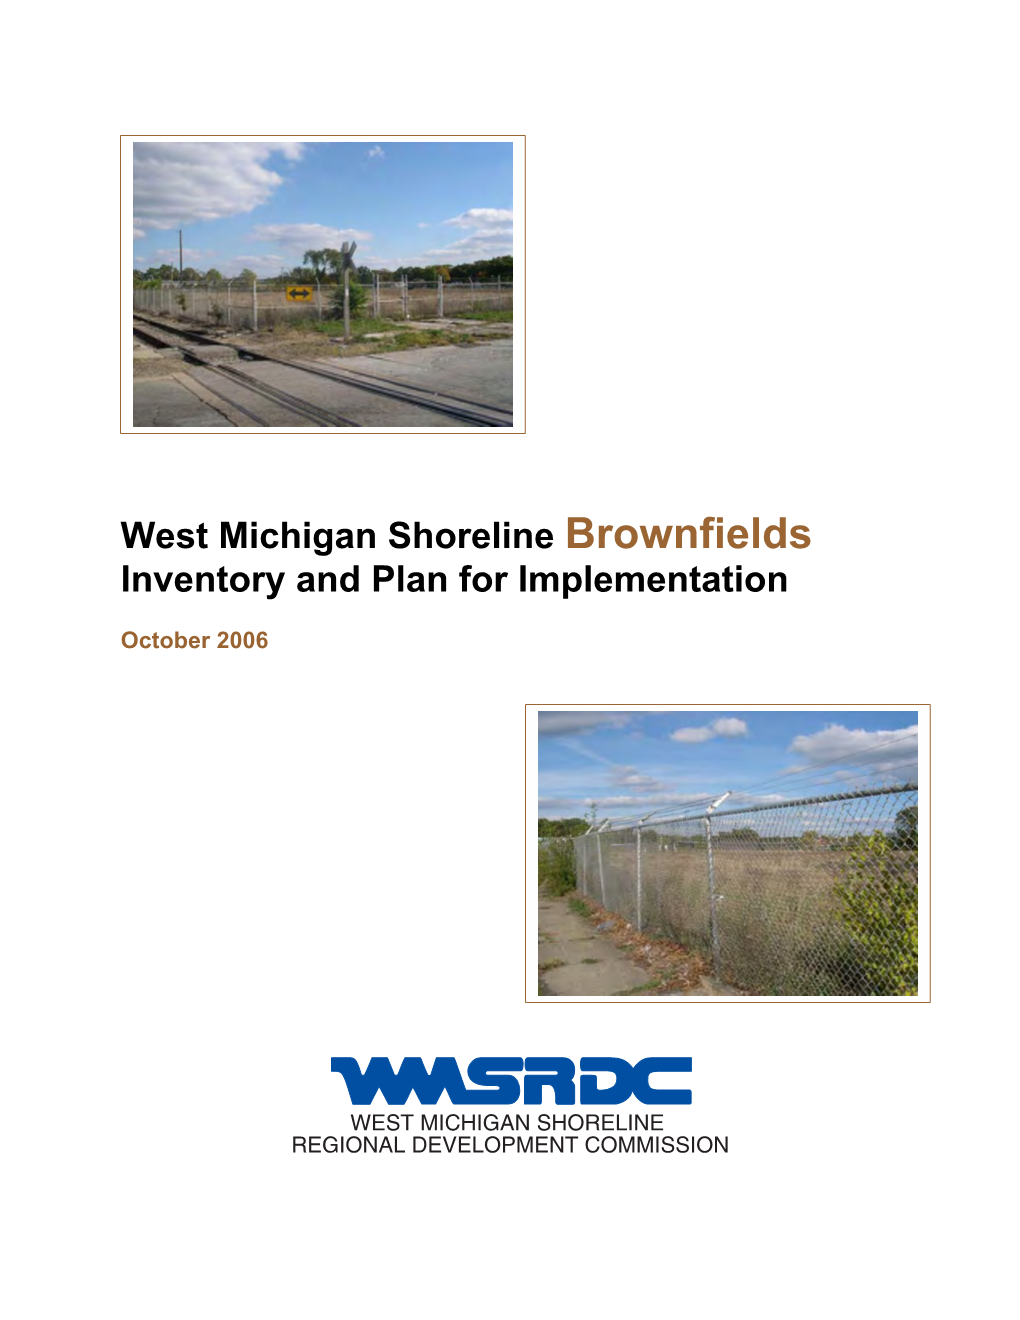 West Michigan Shoreline Brownfields Inventory and Plan for Implementation